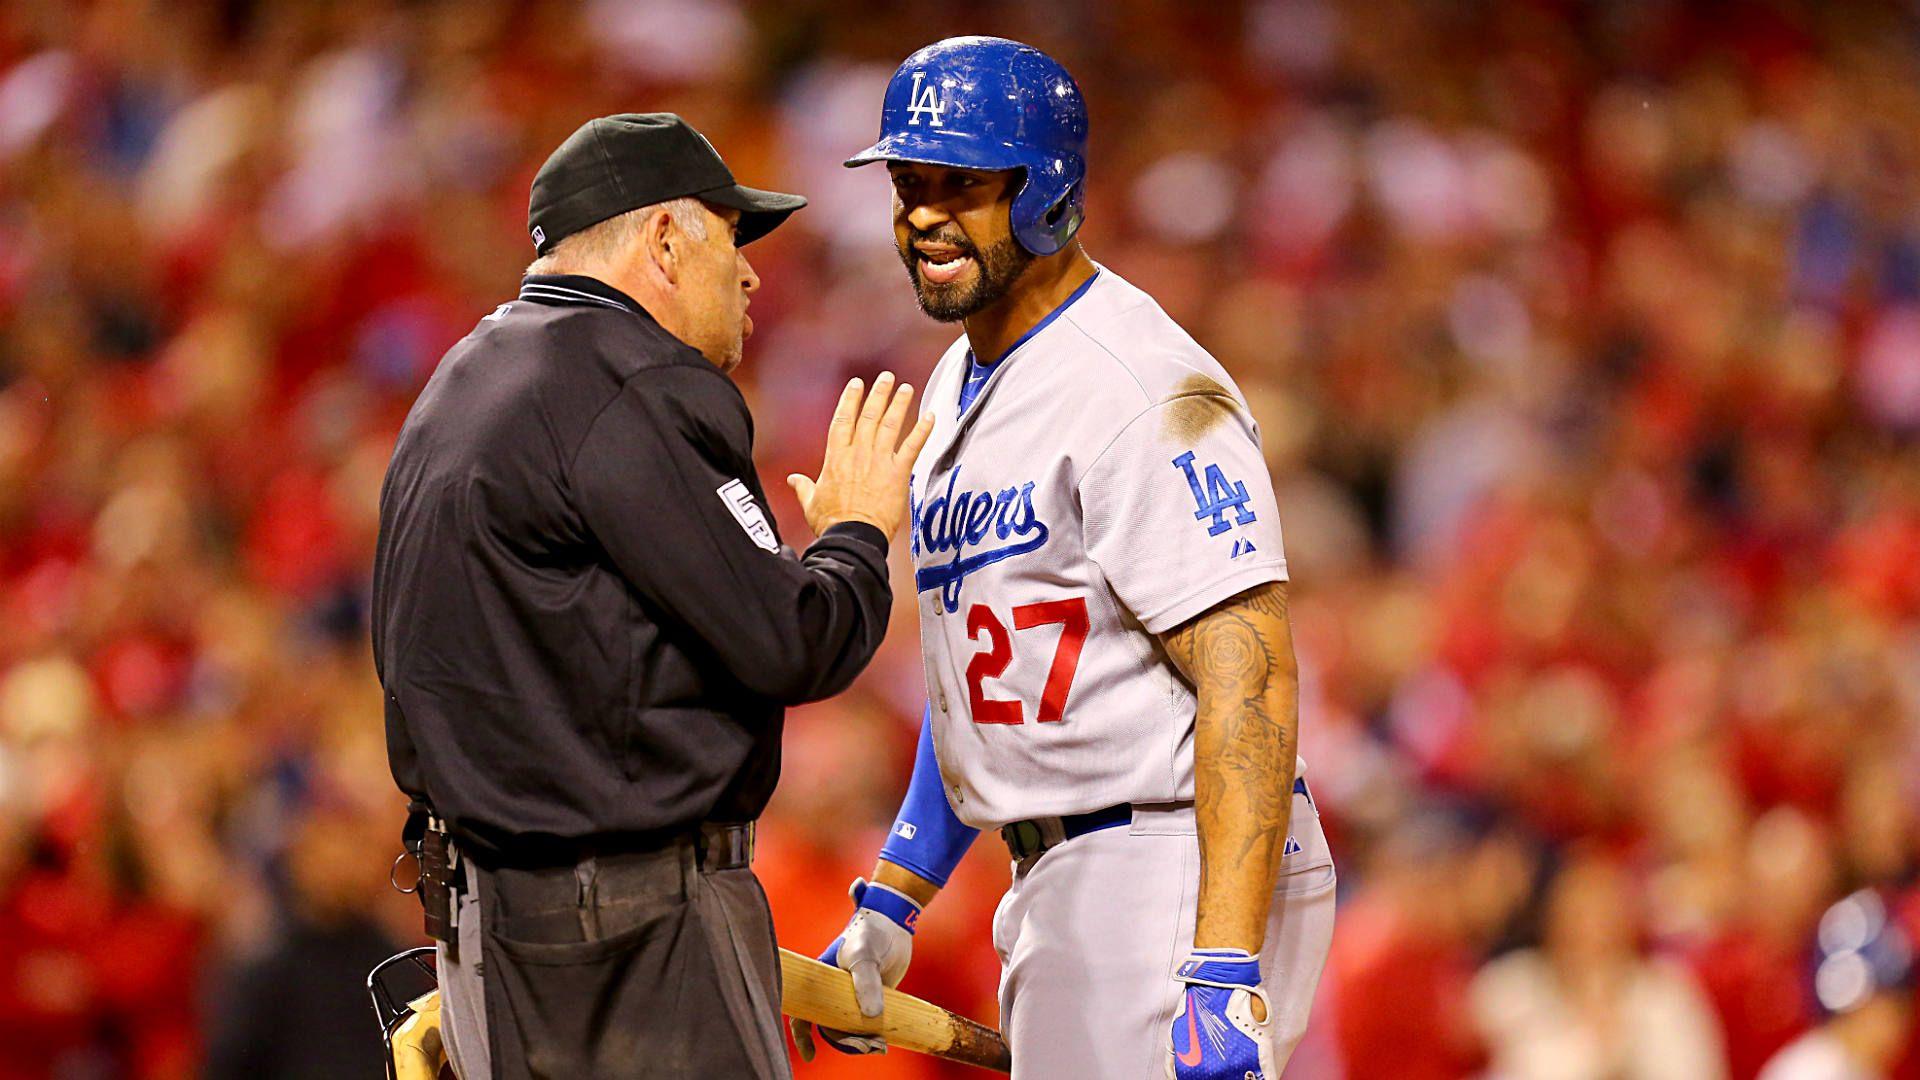 NLDS: Dodgers upset about umpire Dale Scott's strike zone judgment